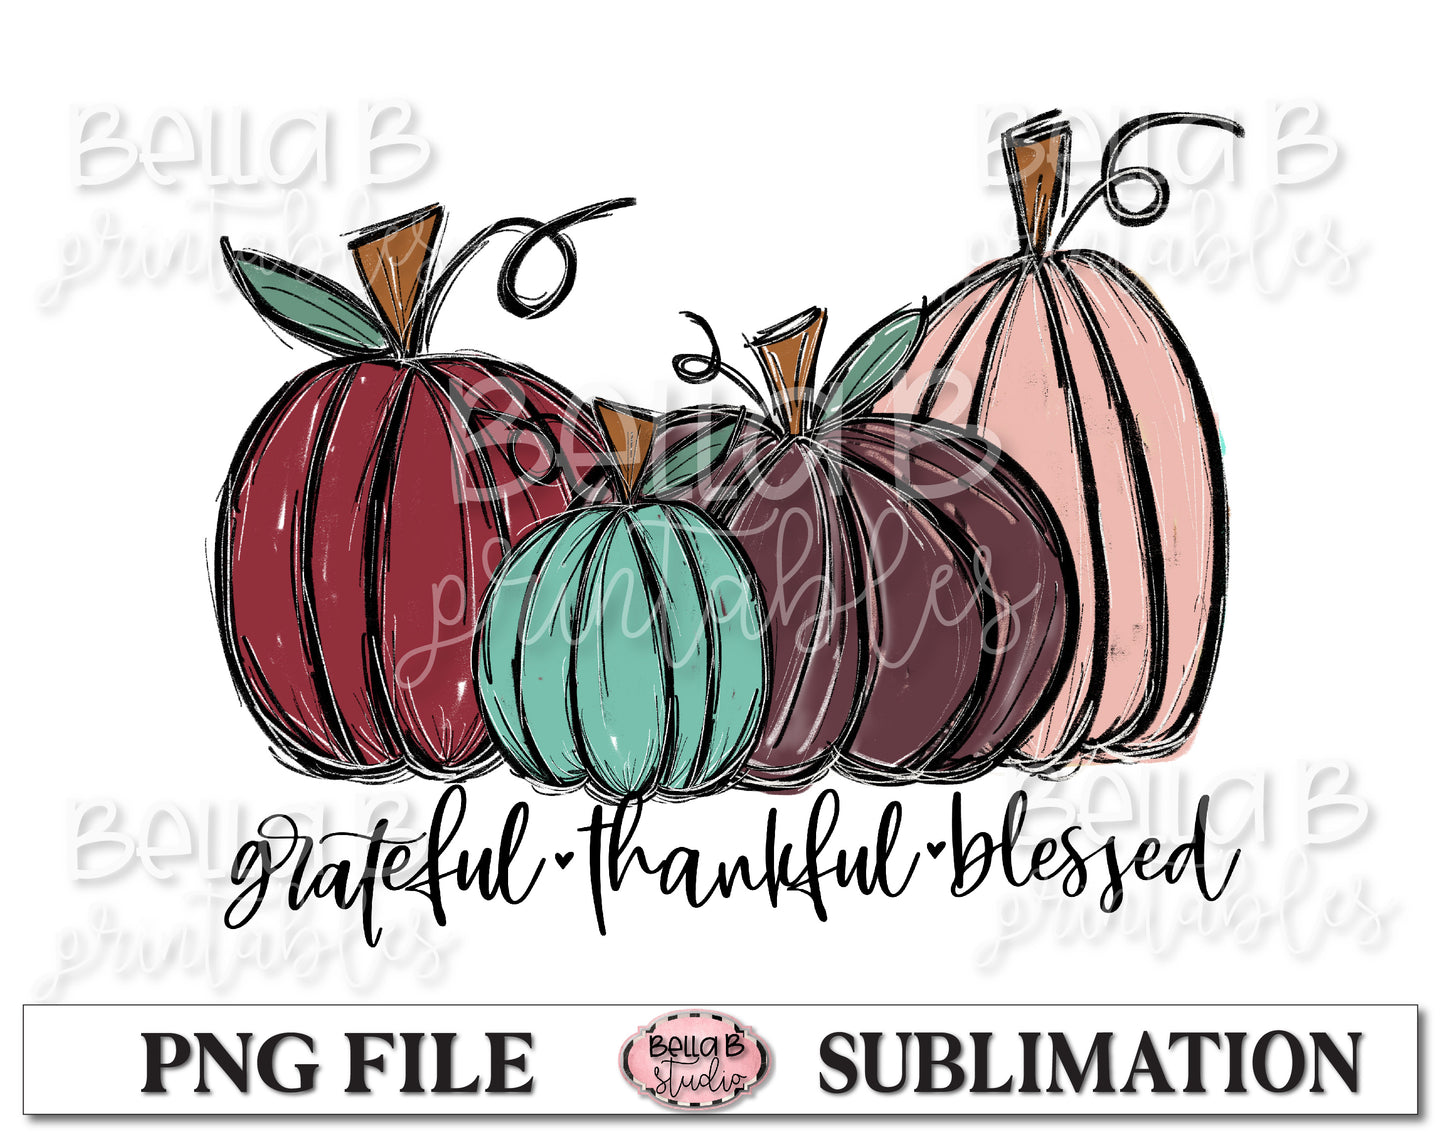 Grateful Thankful Blessed Sublimation Design, Fall Pumpkins, Hand Drawn